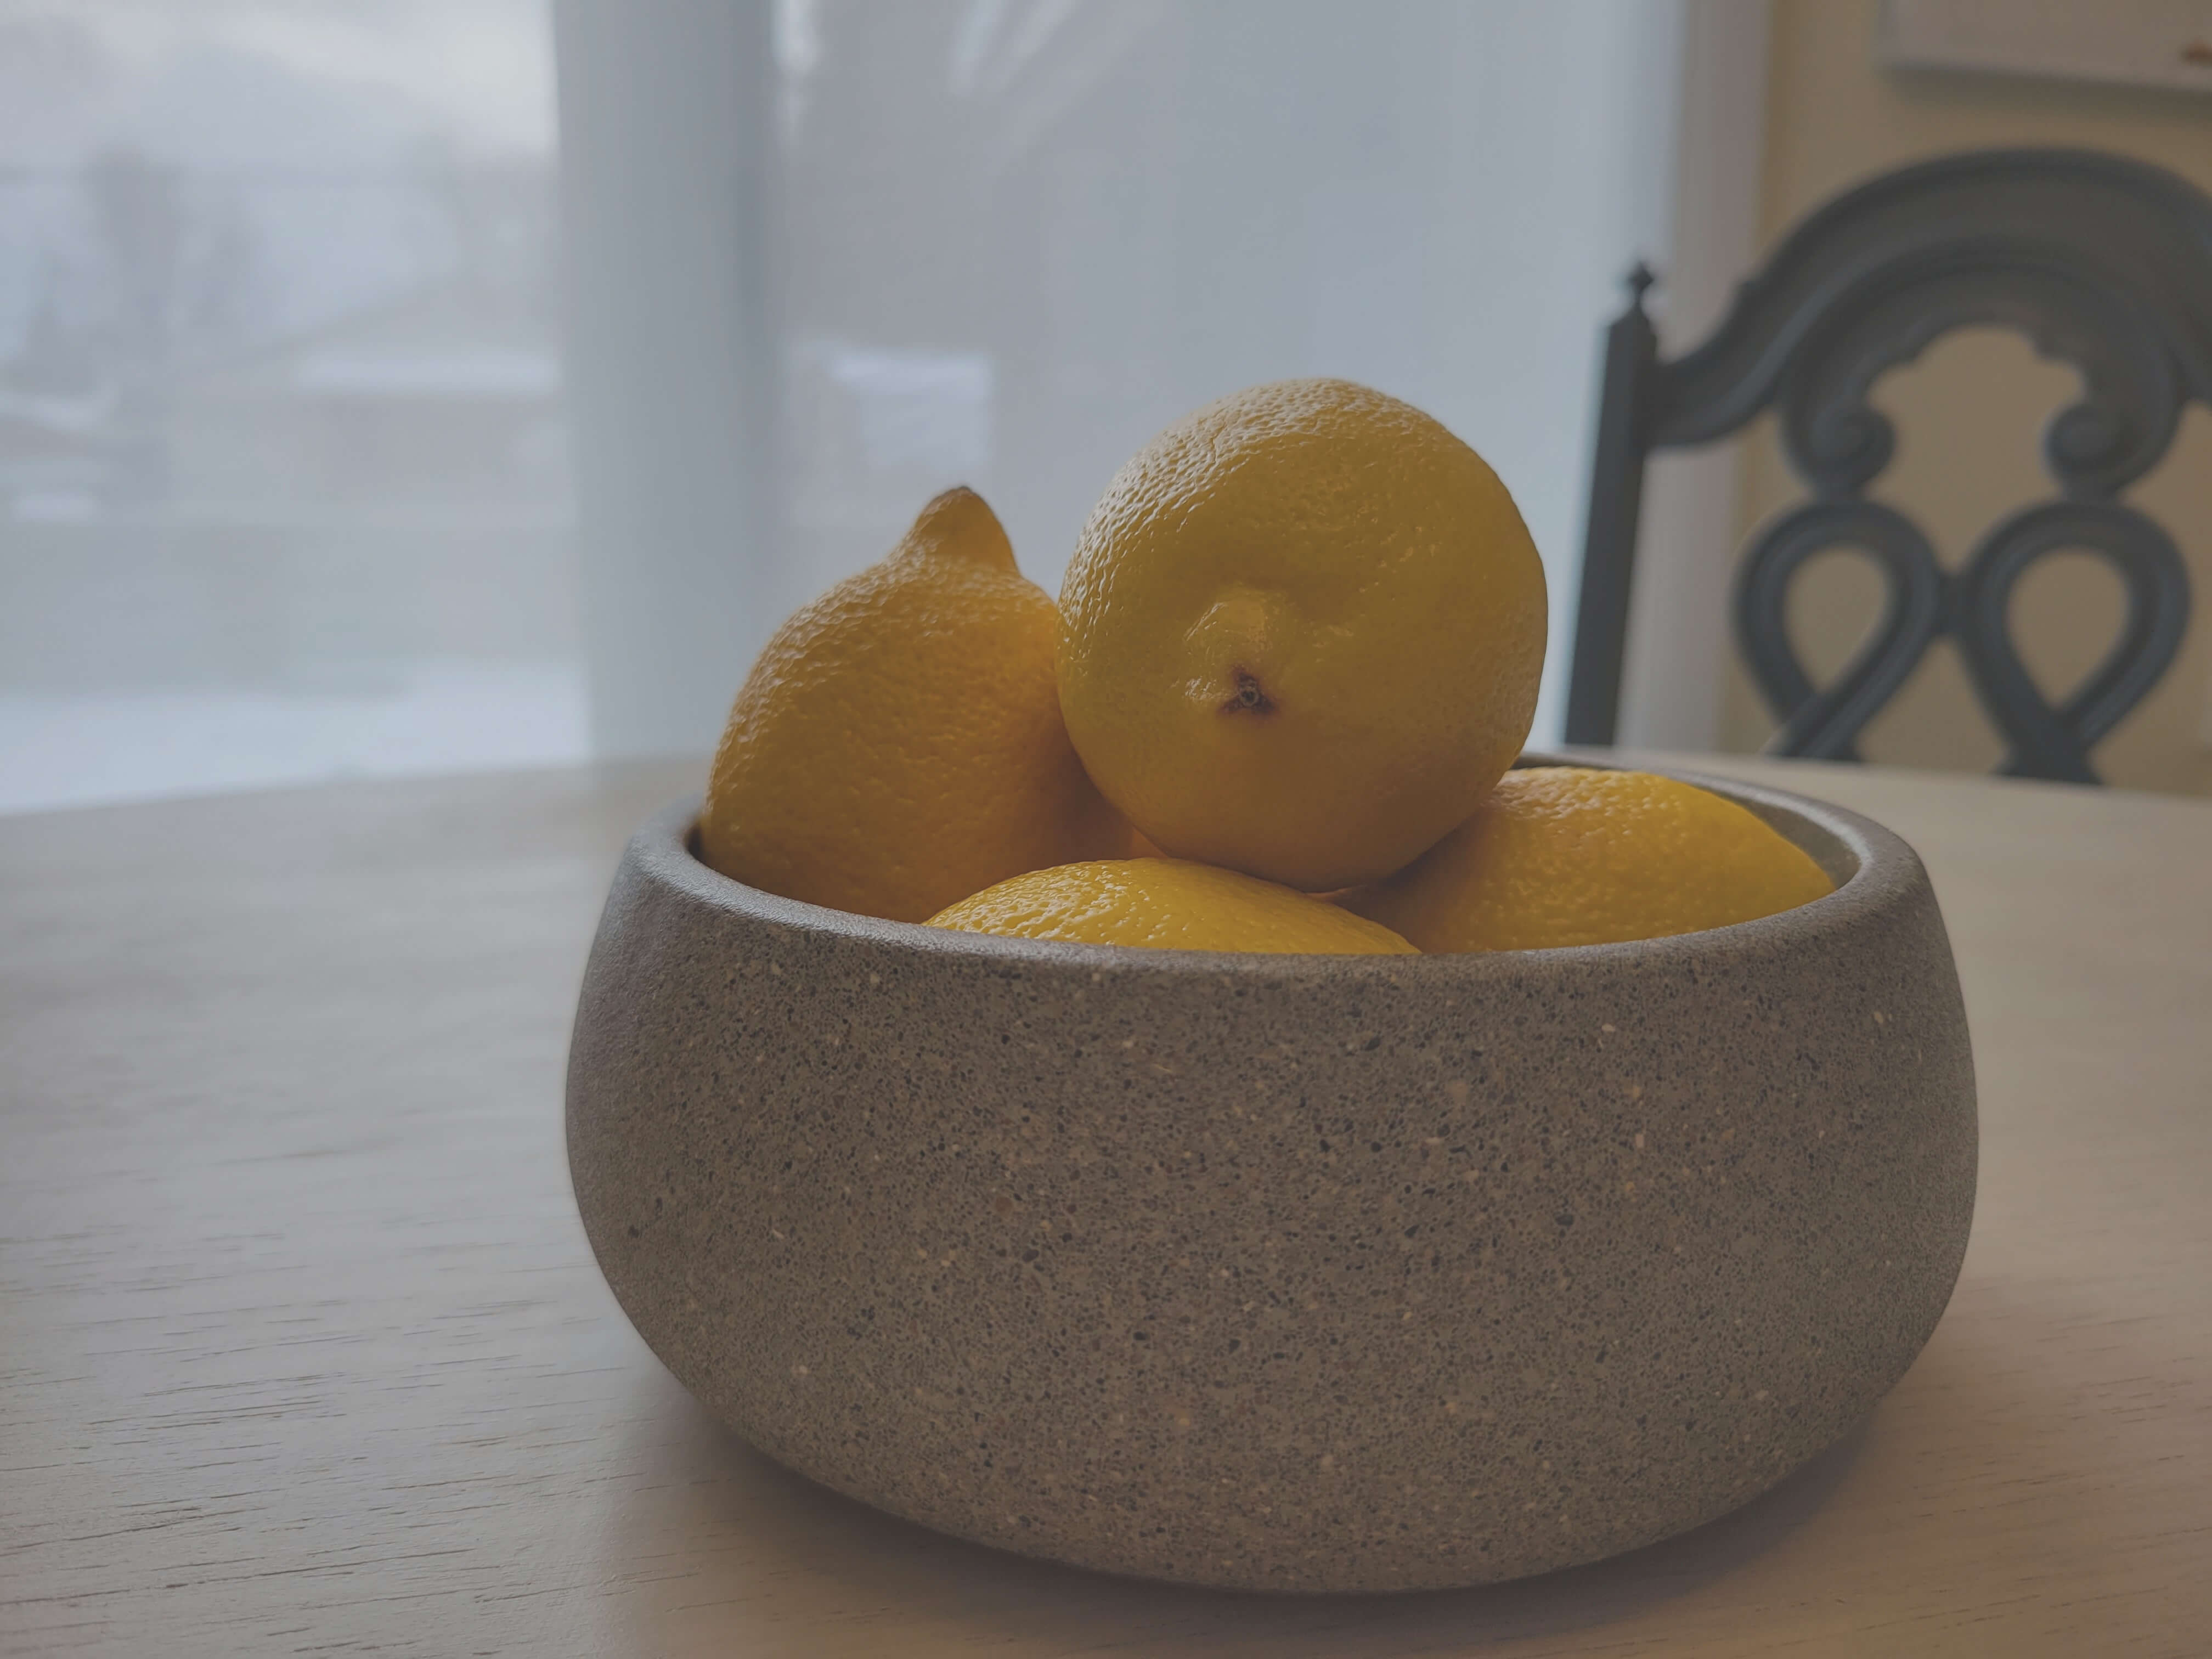 Bright Yellow Lemons in Grey Stone Bowl on Table - Vibrant Kitchen Decor Accessory